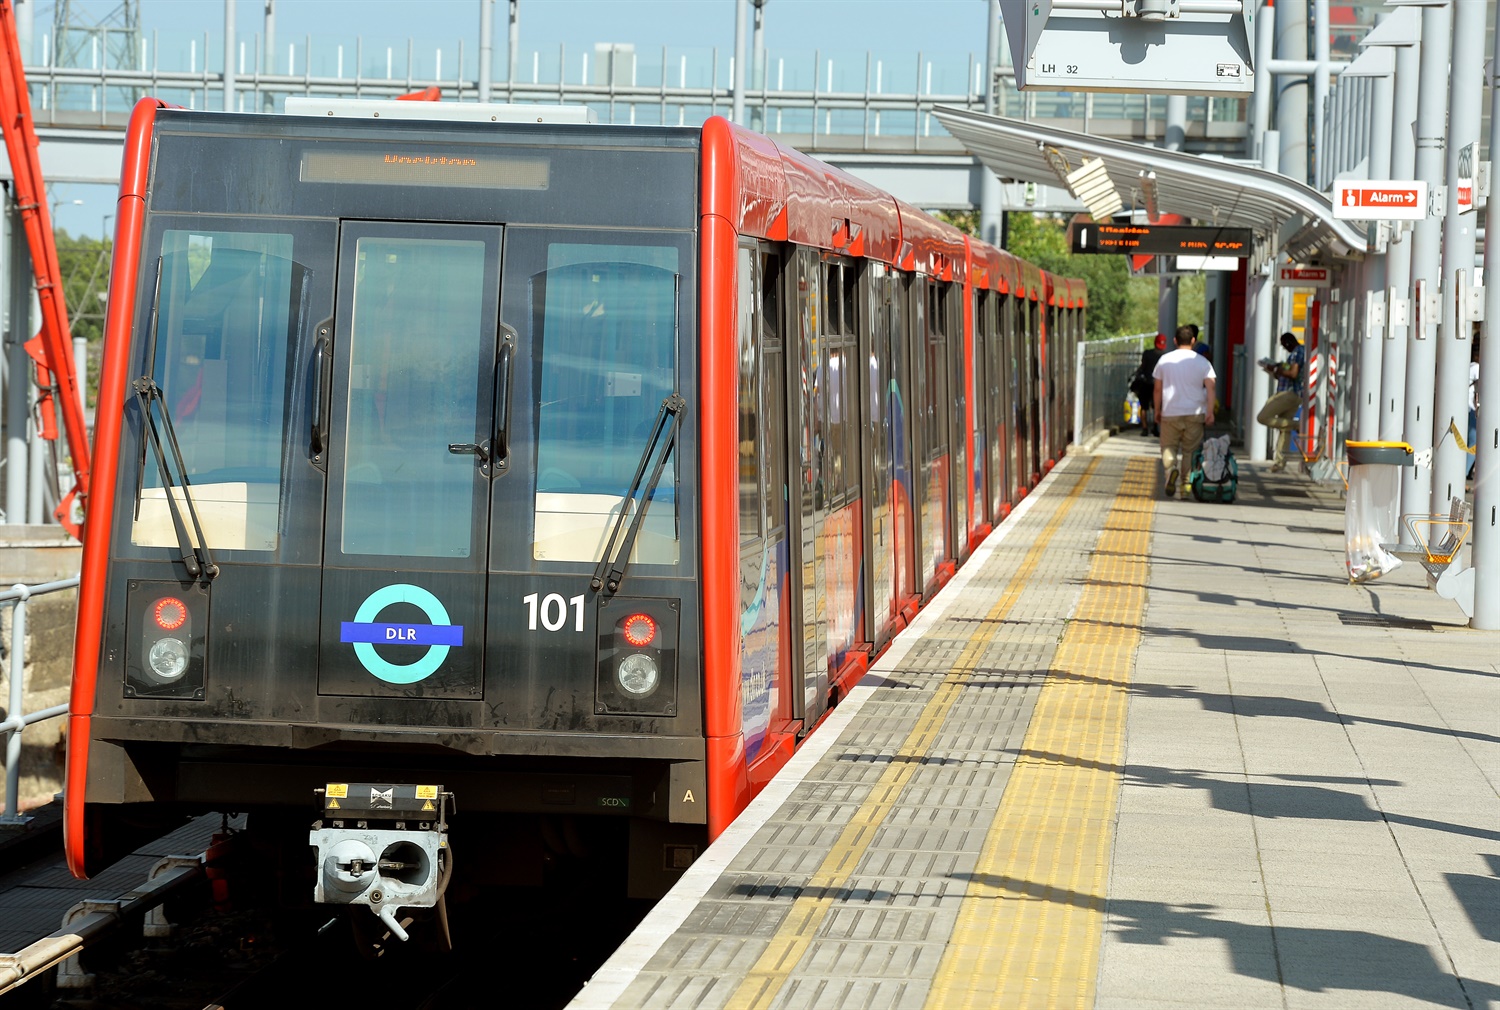 TfL awards contract for new DLR fleet to replace 30-year-old trains